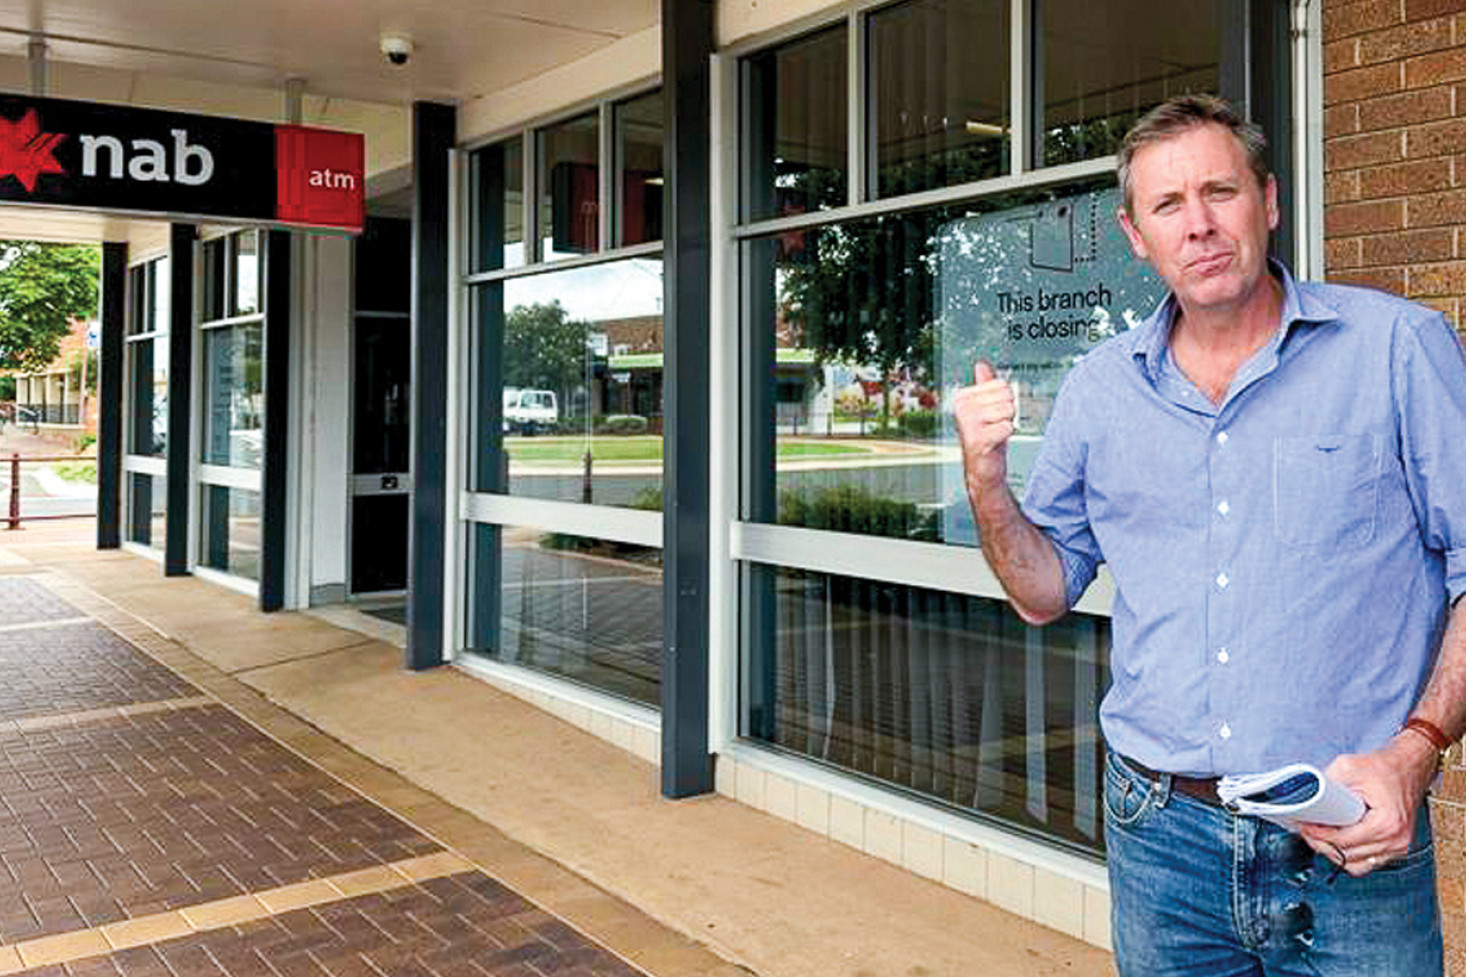 NAB wins, Hamilton loses battle to keep local branch open - feature photo